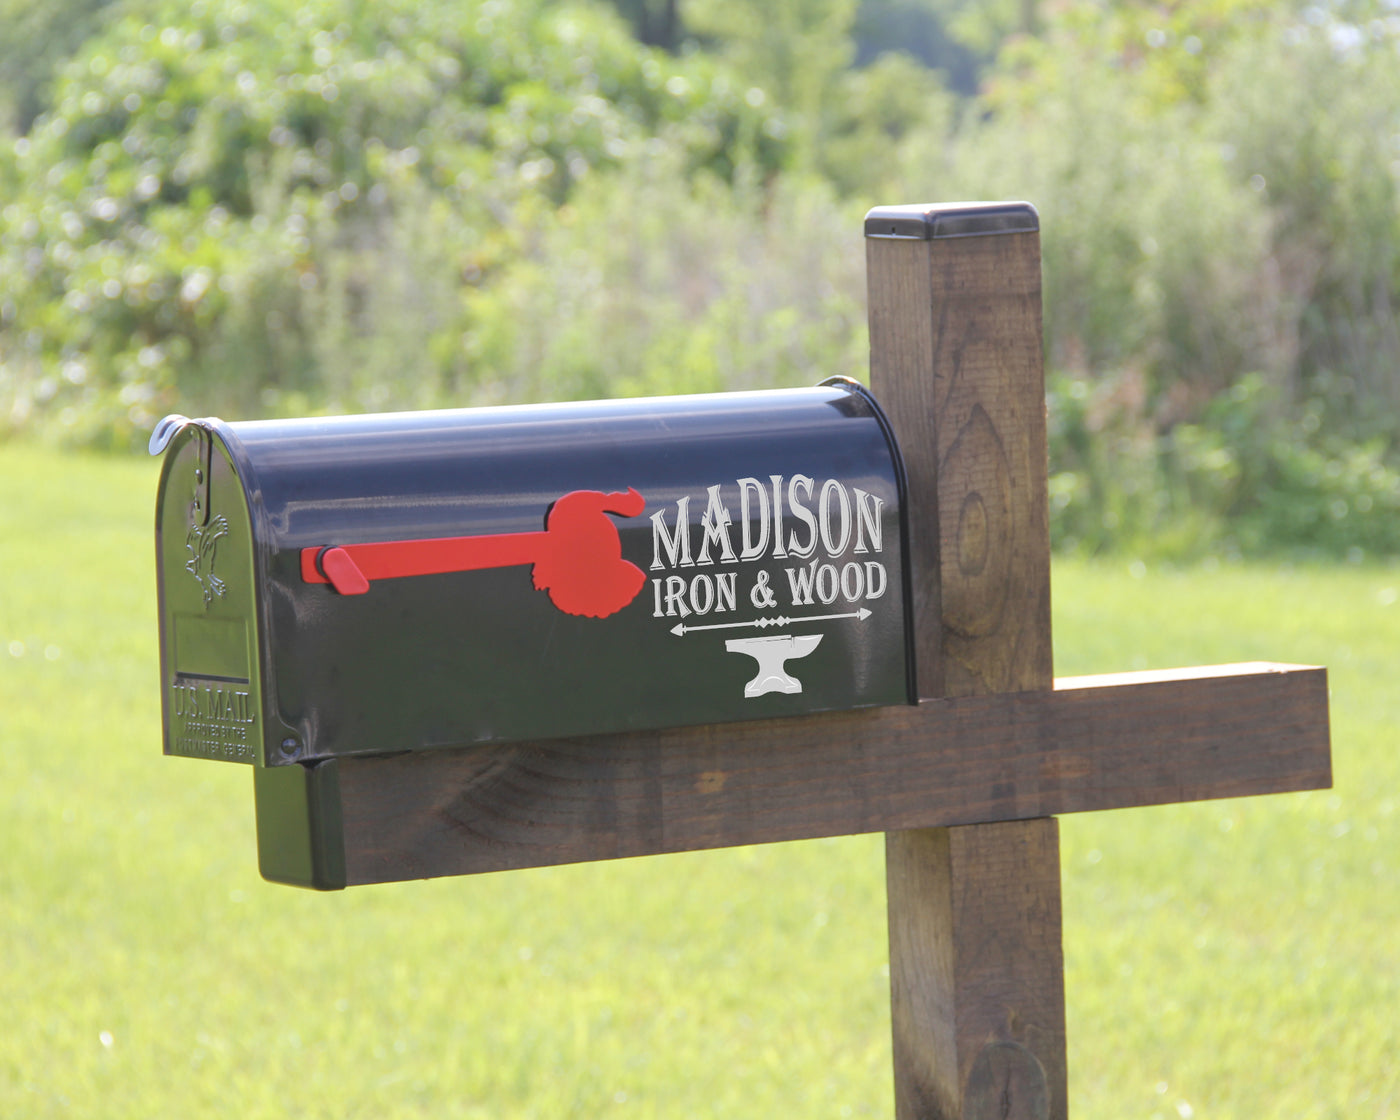 Turkey Mailbox Flag - Madison Iron and Wood - Mailbox Post Decor - metal outdoor decor - Steel deocrations - american made products - veteran owned business products - fencing decorations - fencing supplies - custom wall decorations - personalized wall signs - steel - decorative post caps - steel post caps - metal post caps - brackets - structural brackets - home improvement - easter - easter decorations - easter gift - easter yard decor